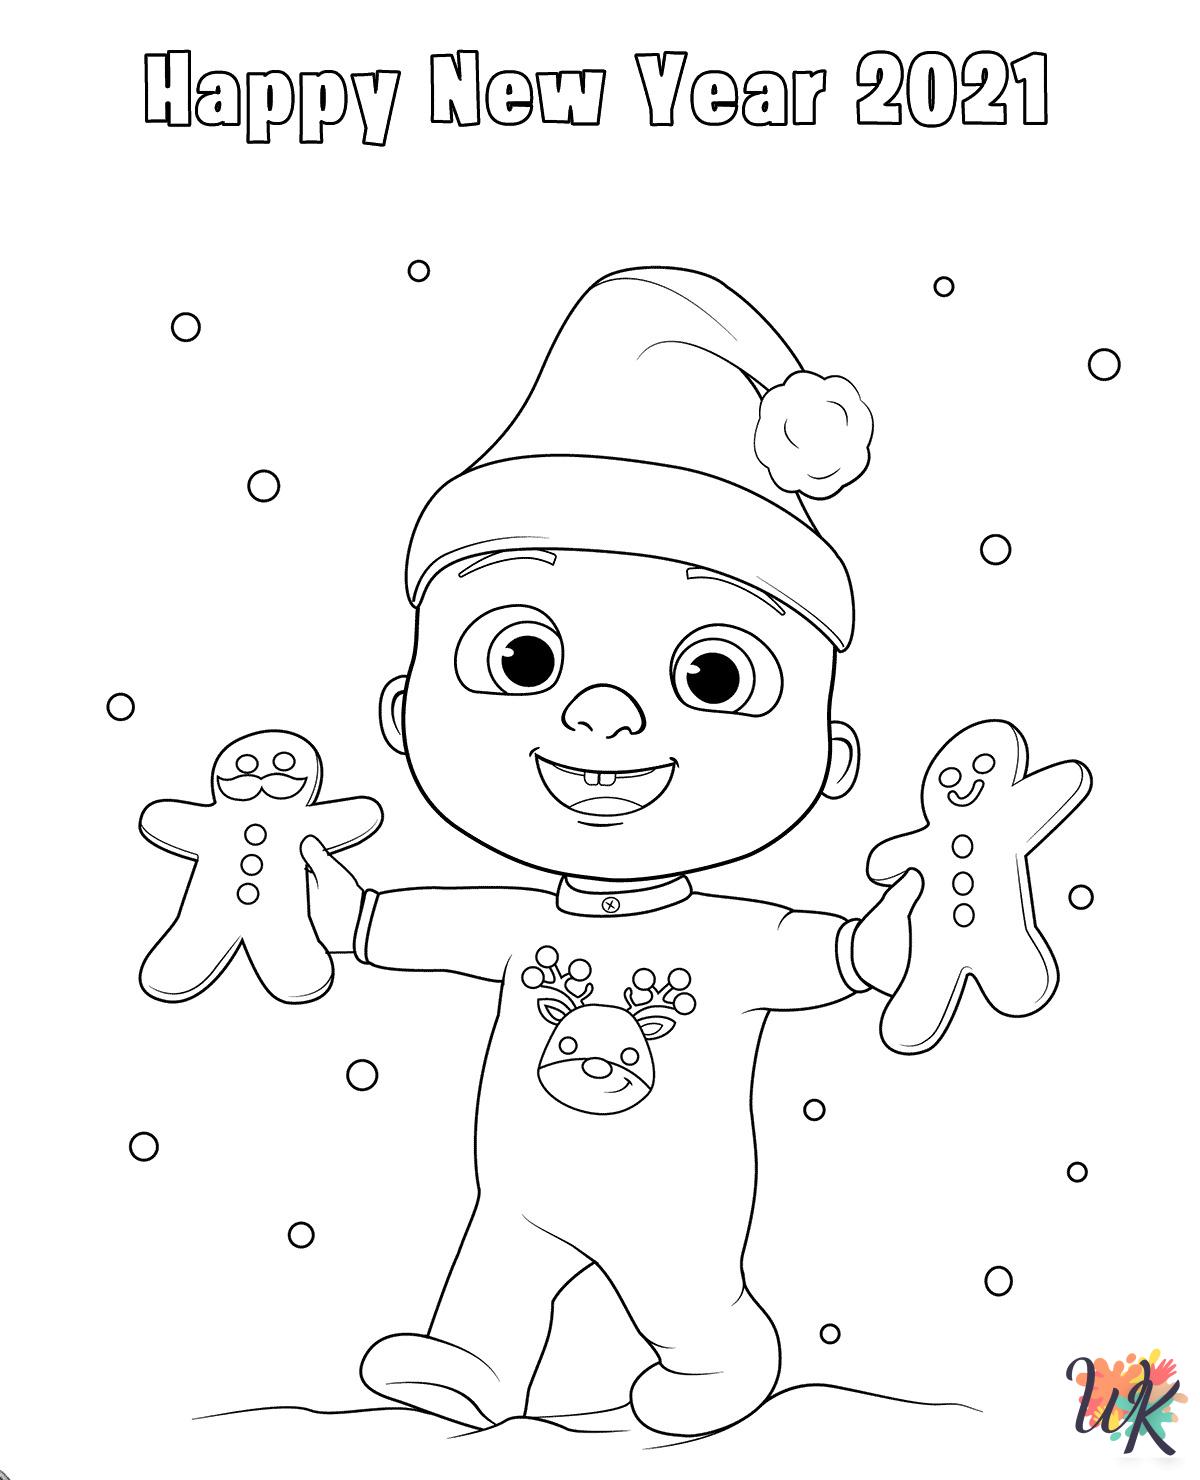 Cocomelon coloring pages free